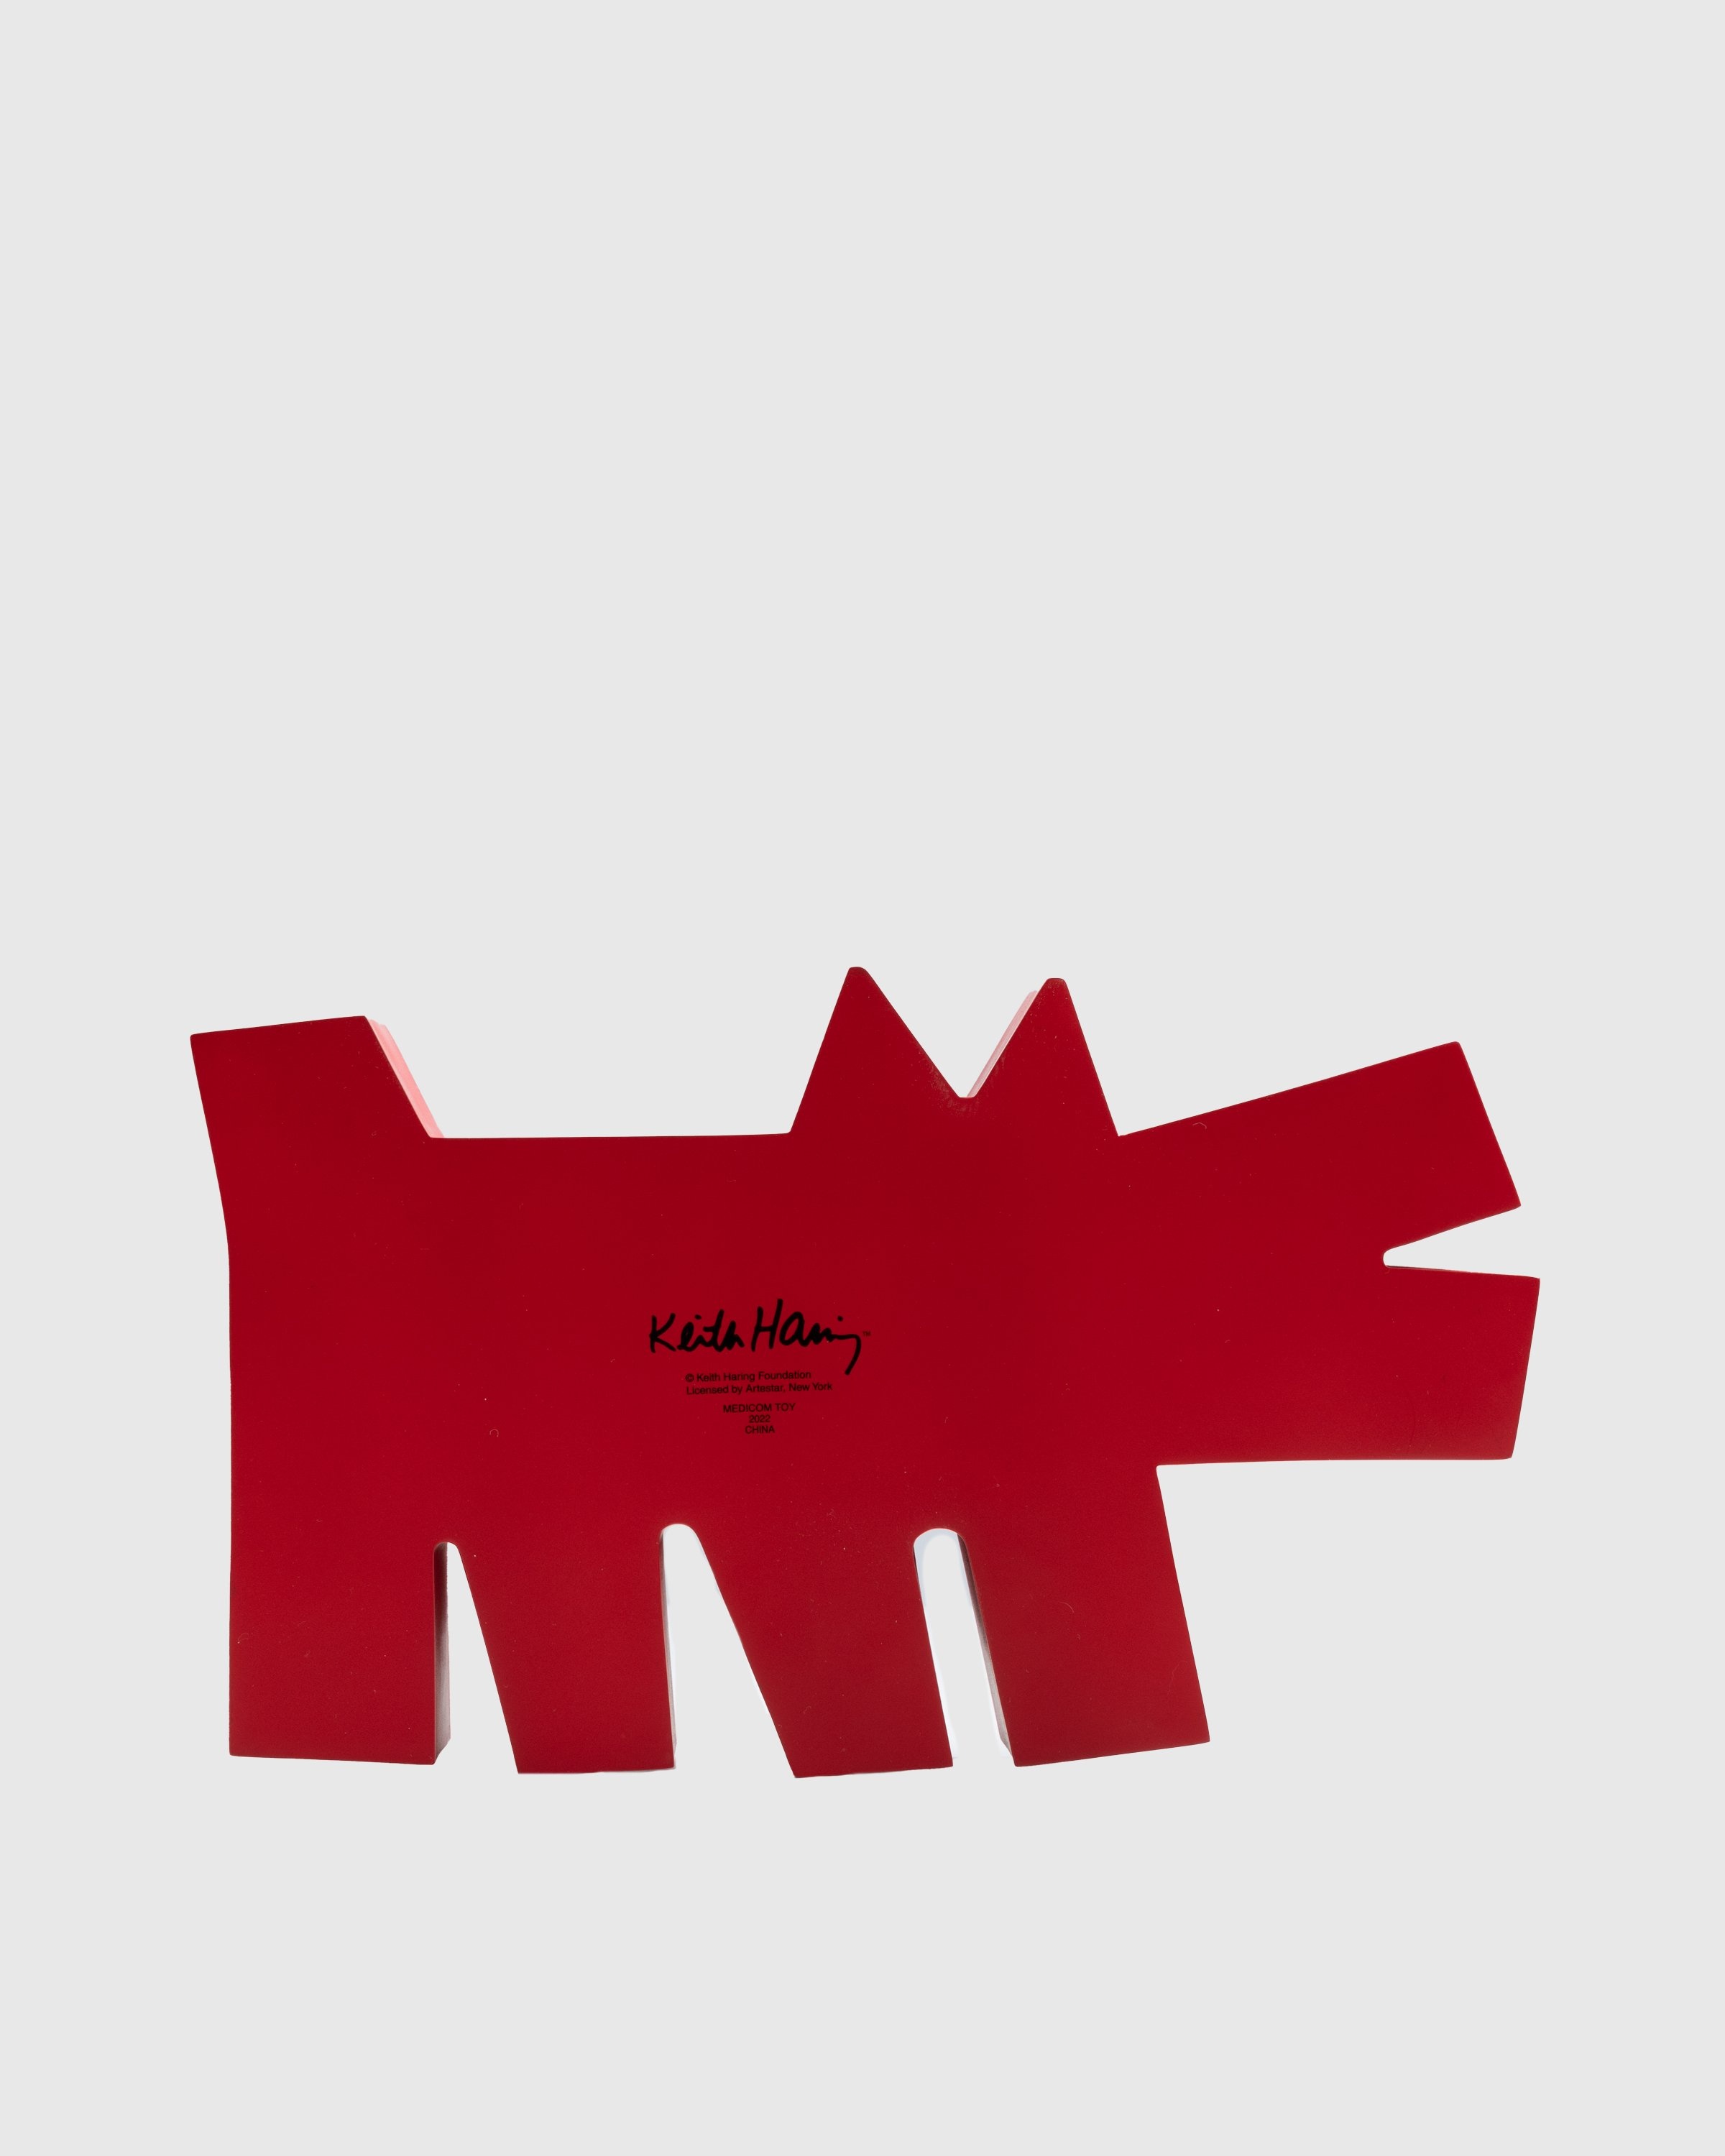 Medicom – Keith Haring Barking Dog Statue Red - Arts & Collectibles - Red - Image 3